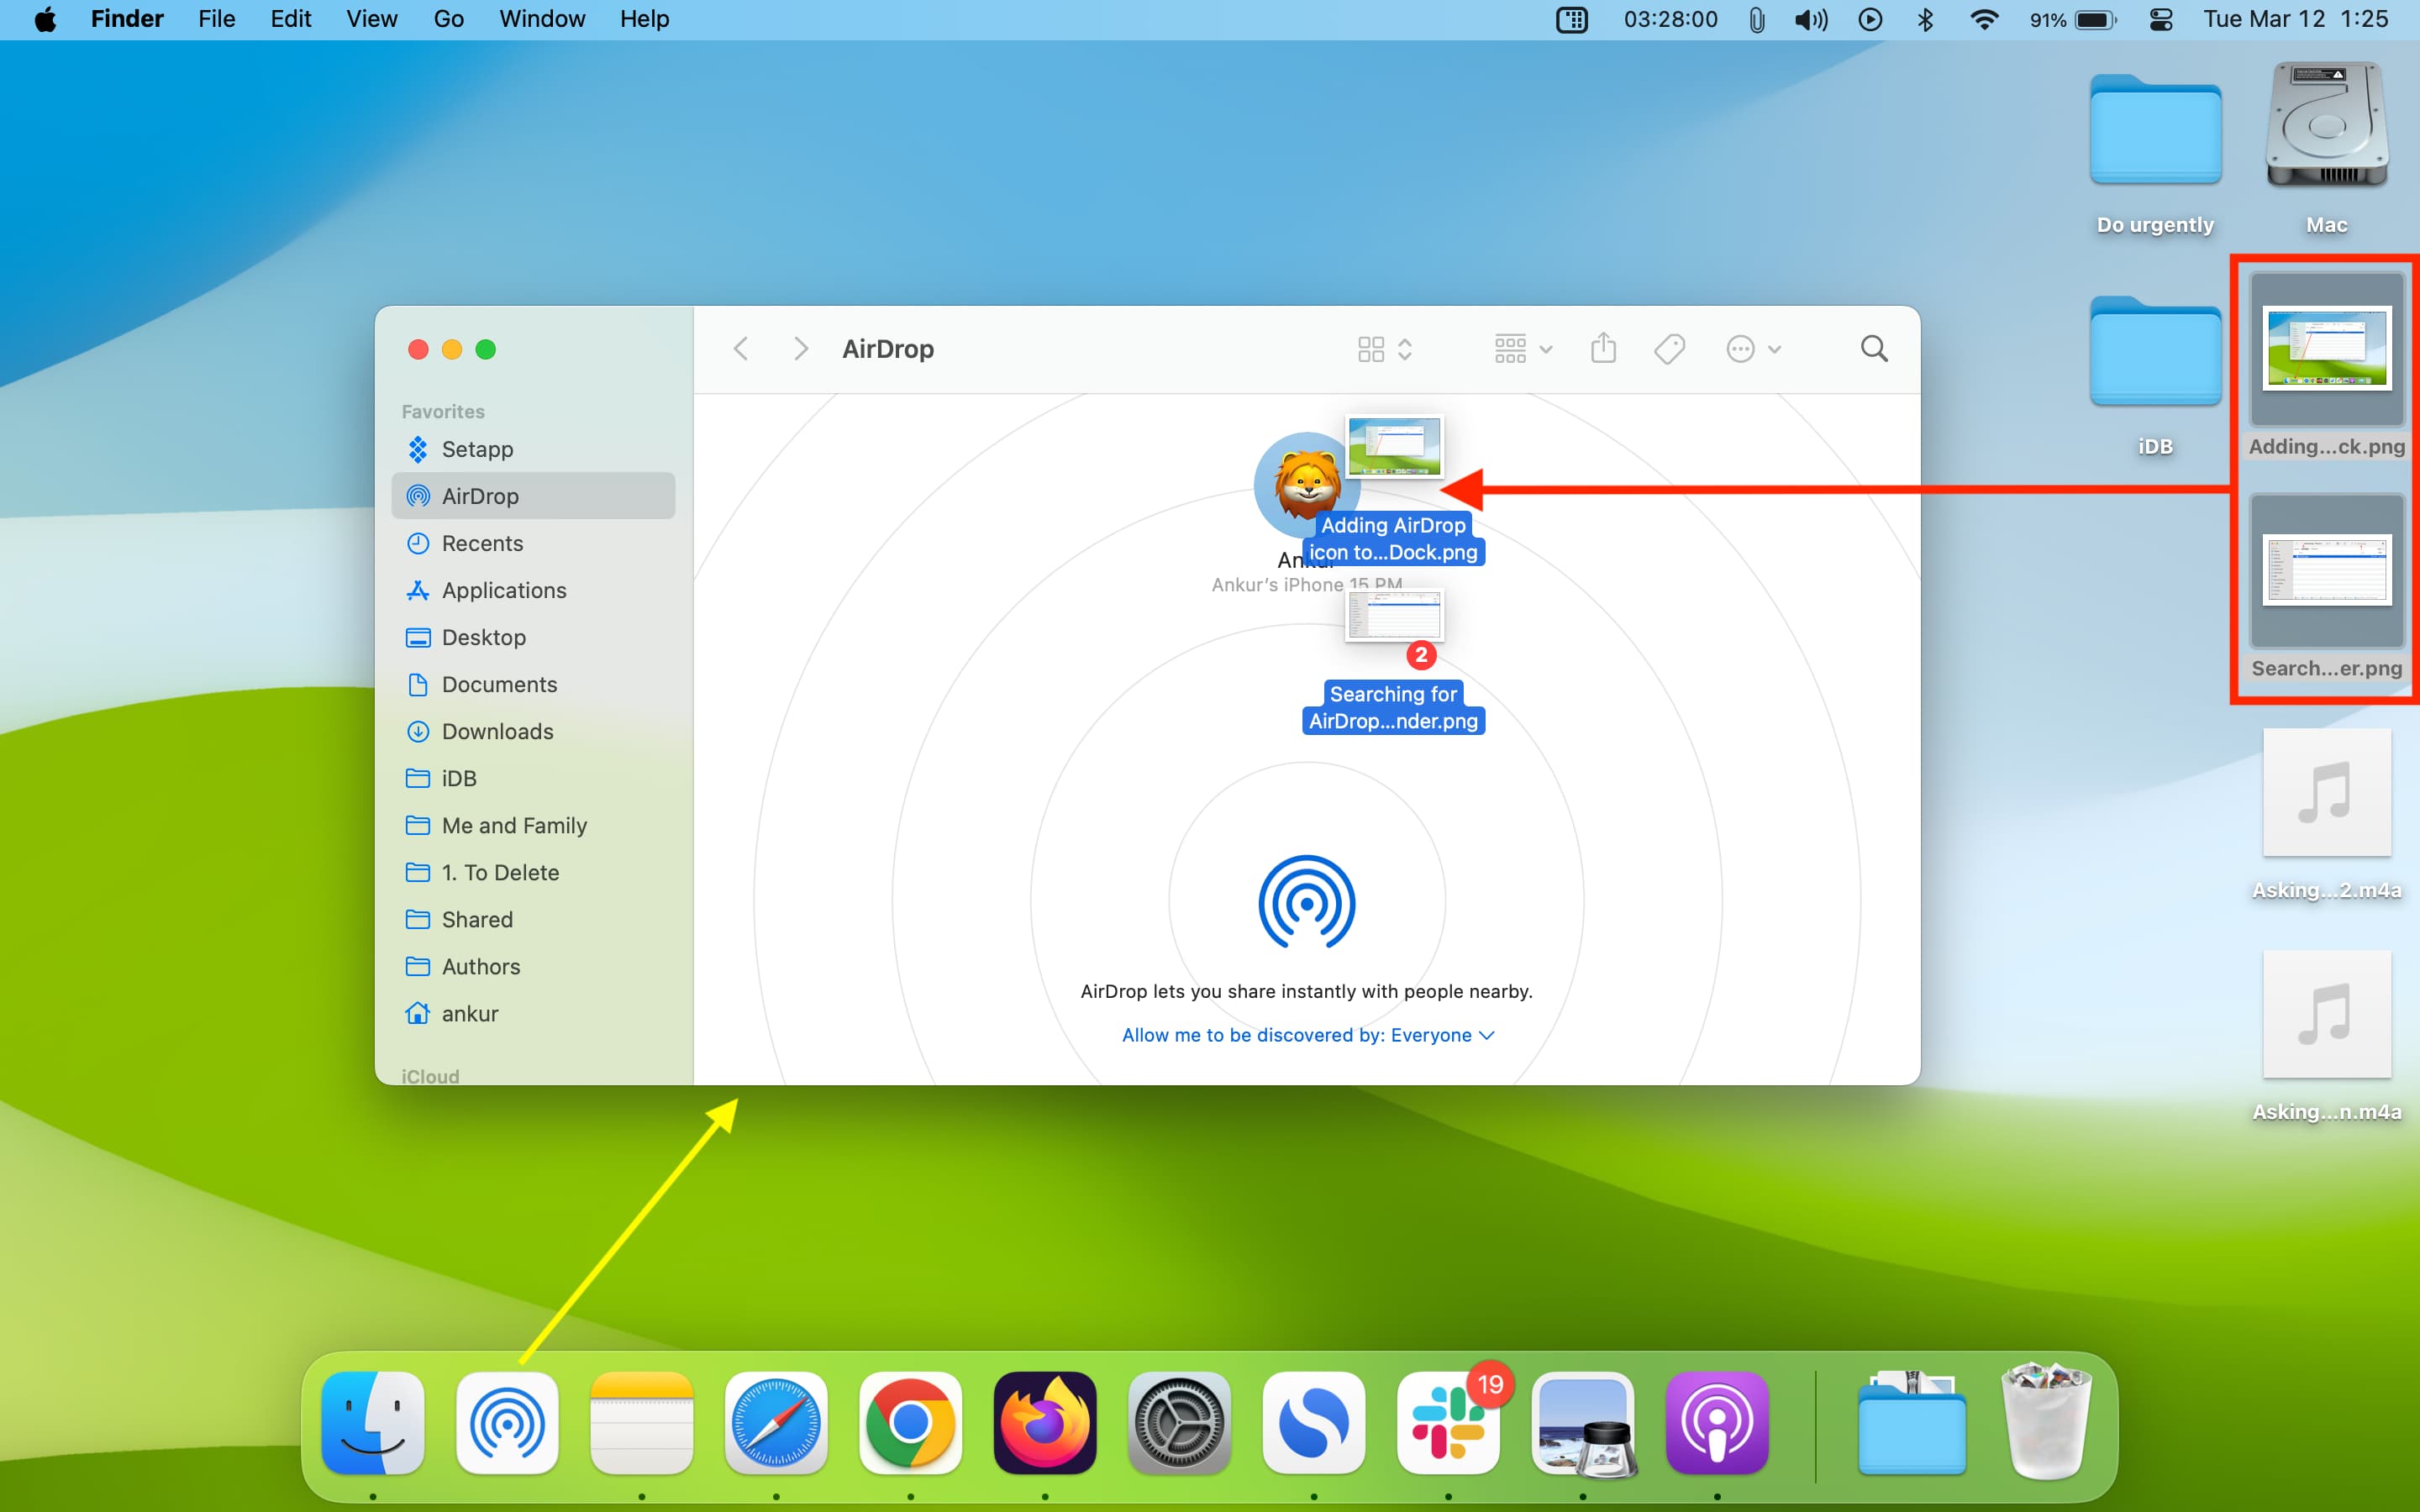 Sending files using AirDrop by dragging it to other device in AirDrop Finder window